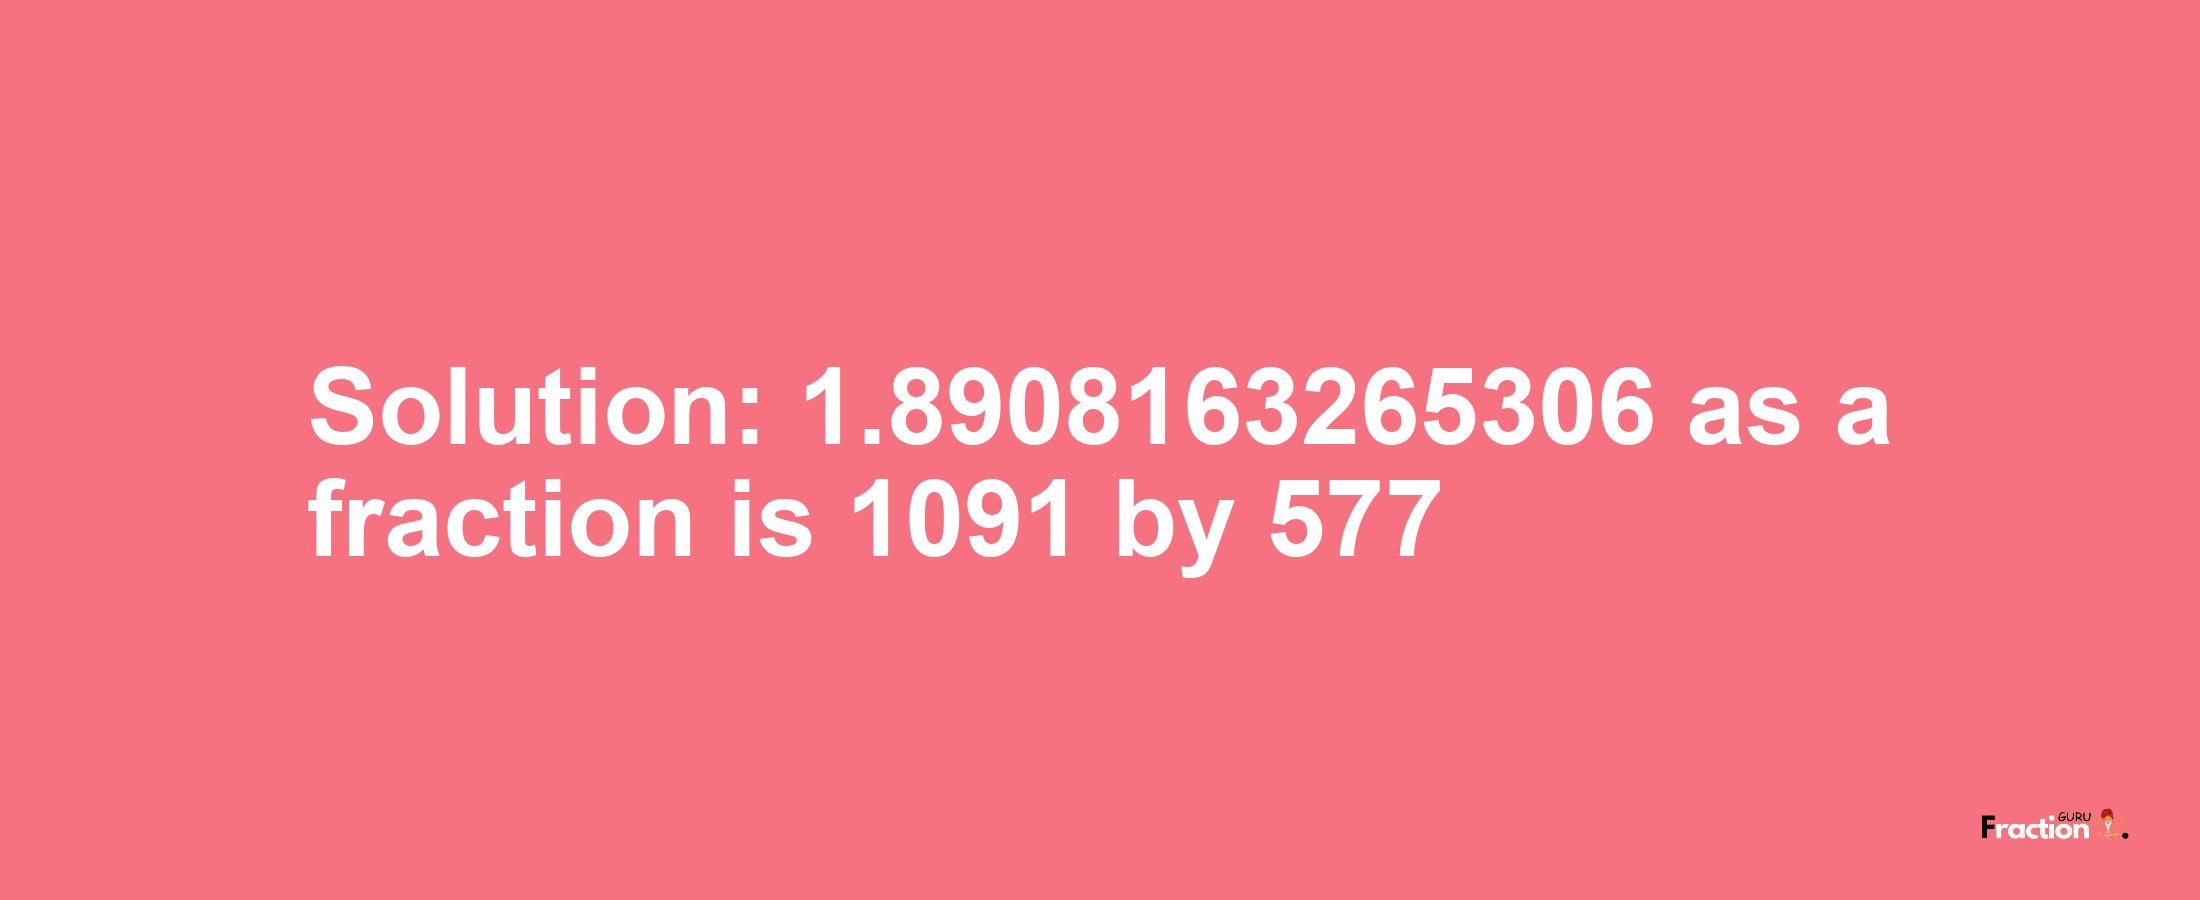 Solution:1.8908163265306 as a fraction is 1091/577